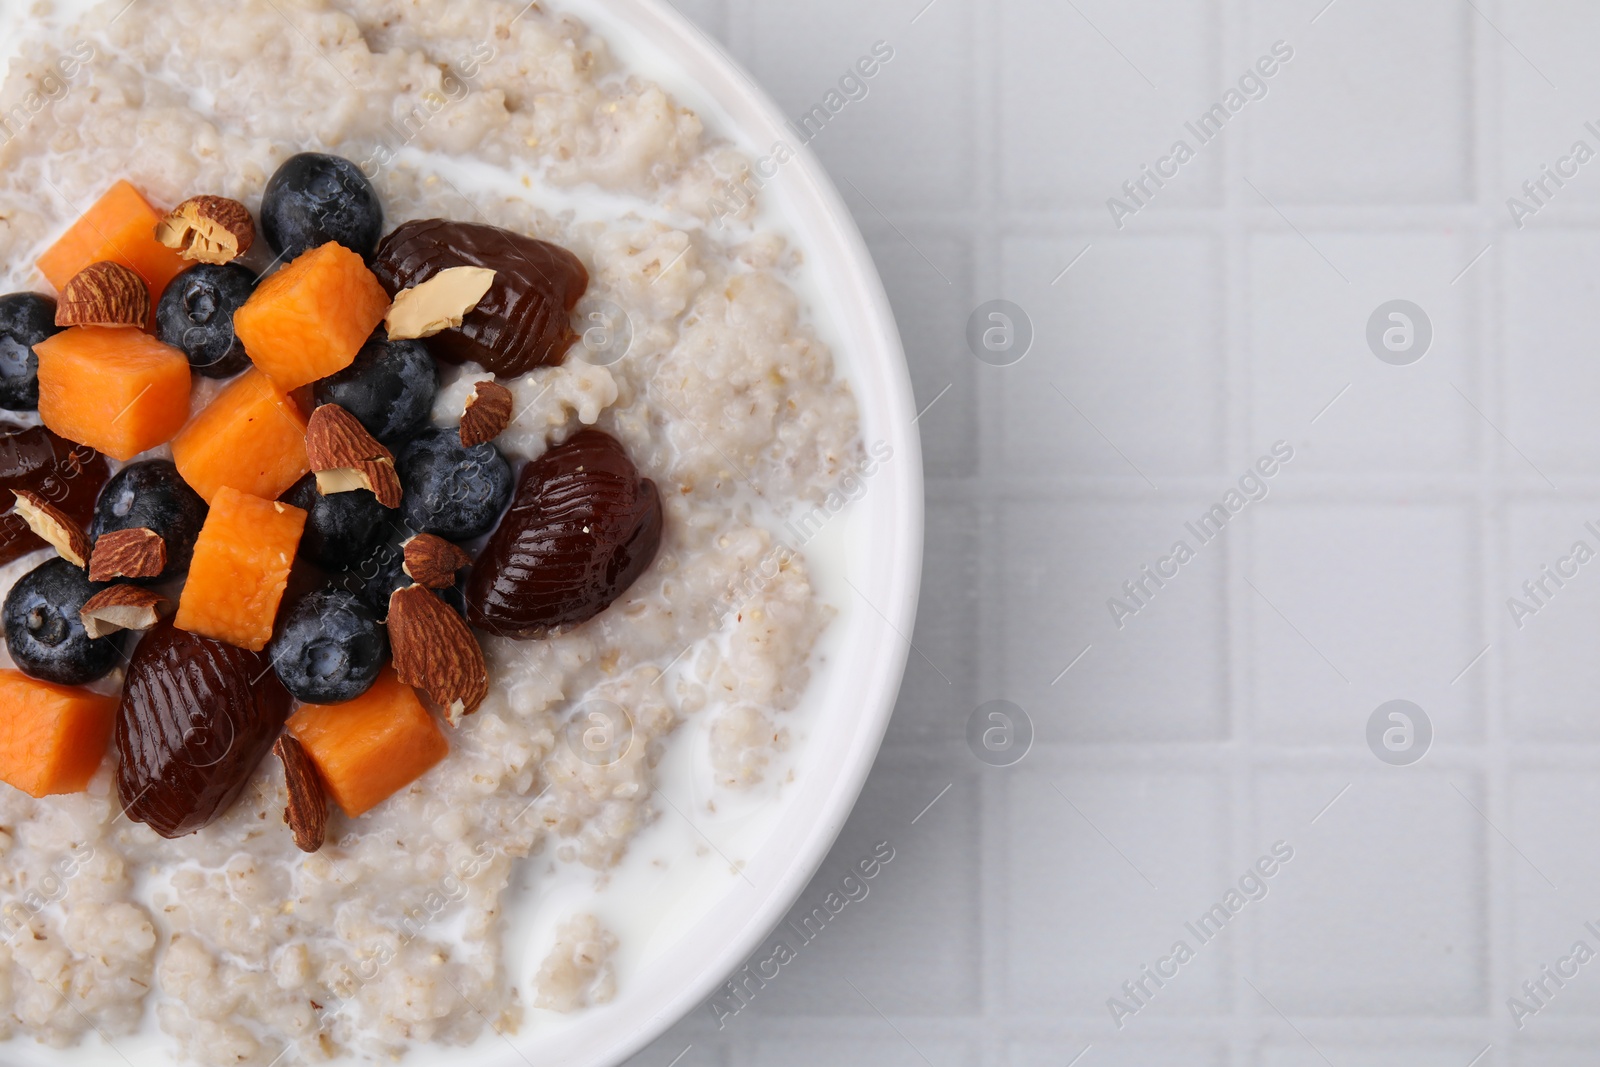 Photo of Delicious barley porridge with blueberries, pumpkin, dates and almonds in bowl on white tiled table, top view. Space for text